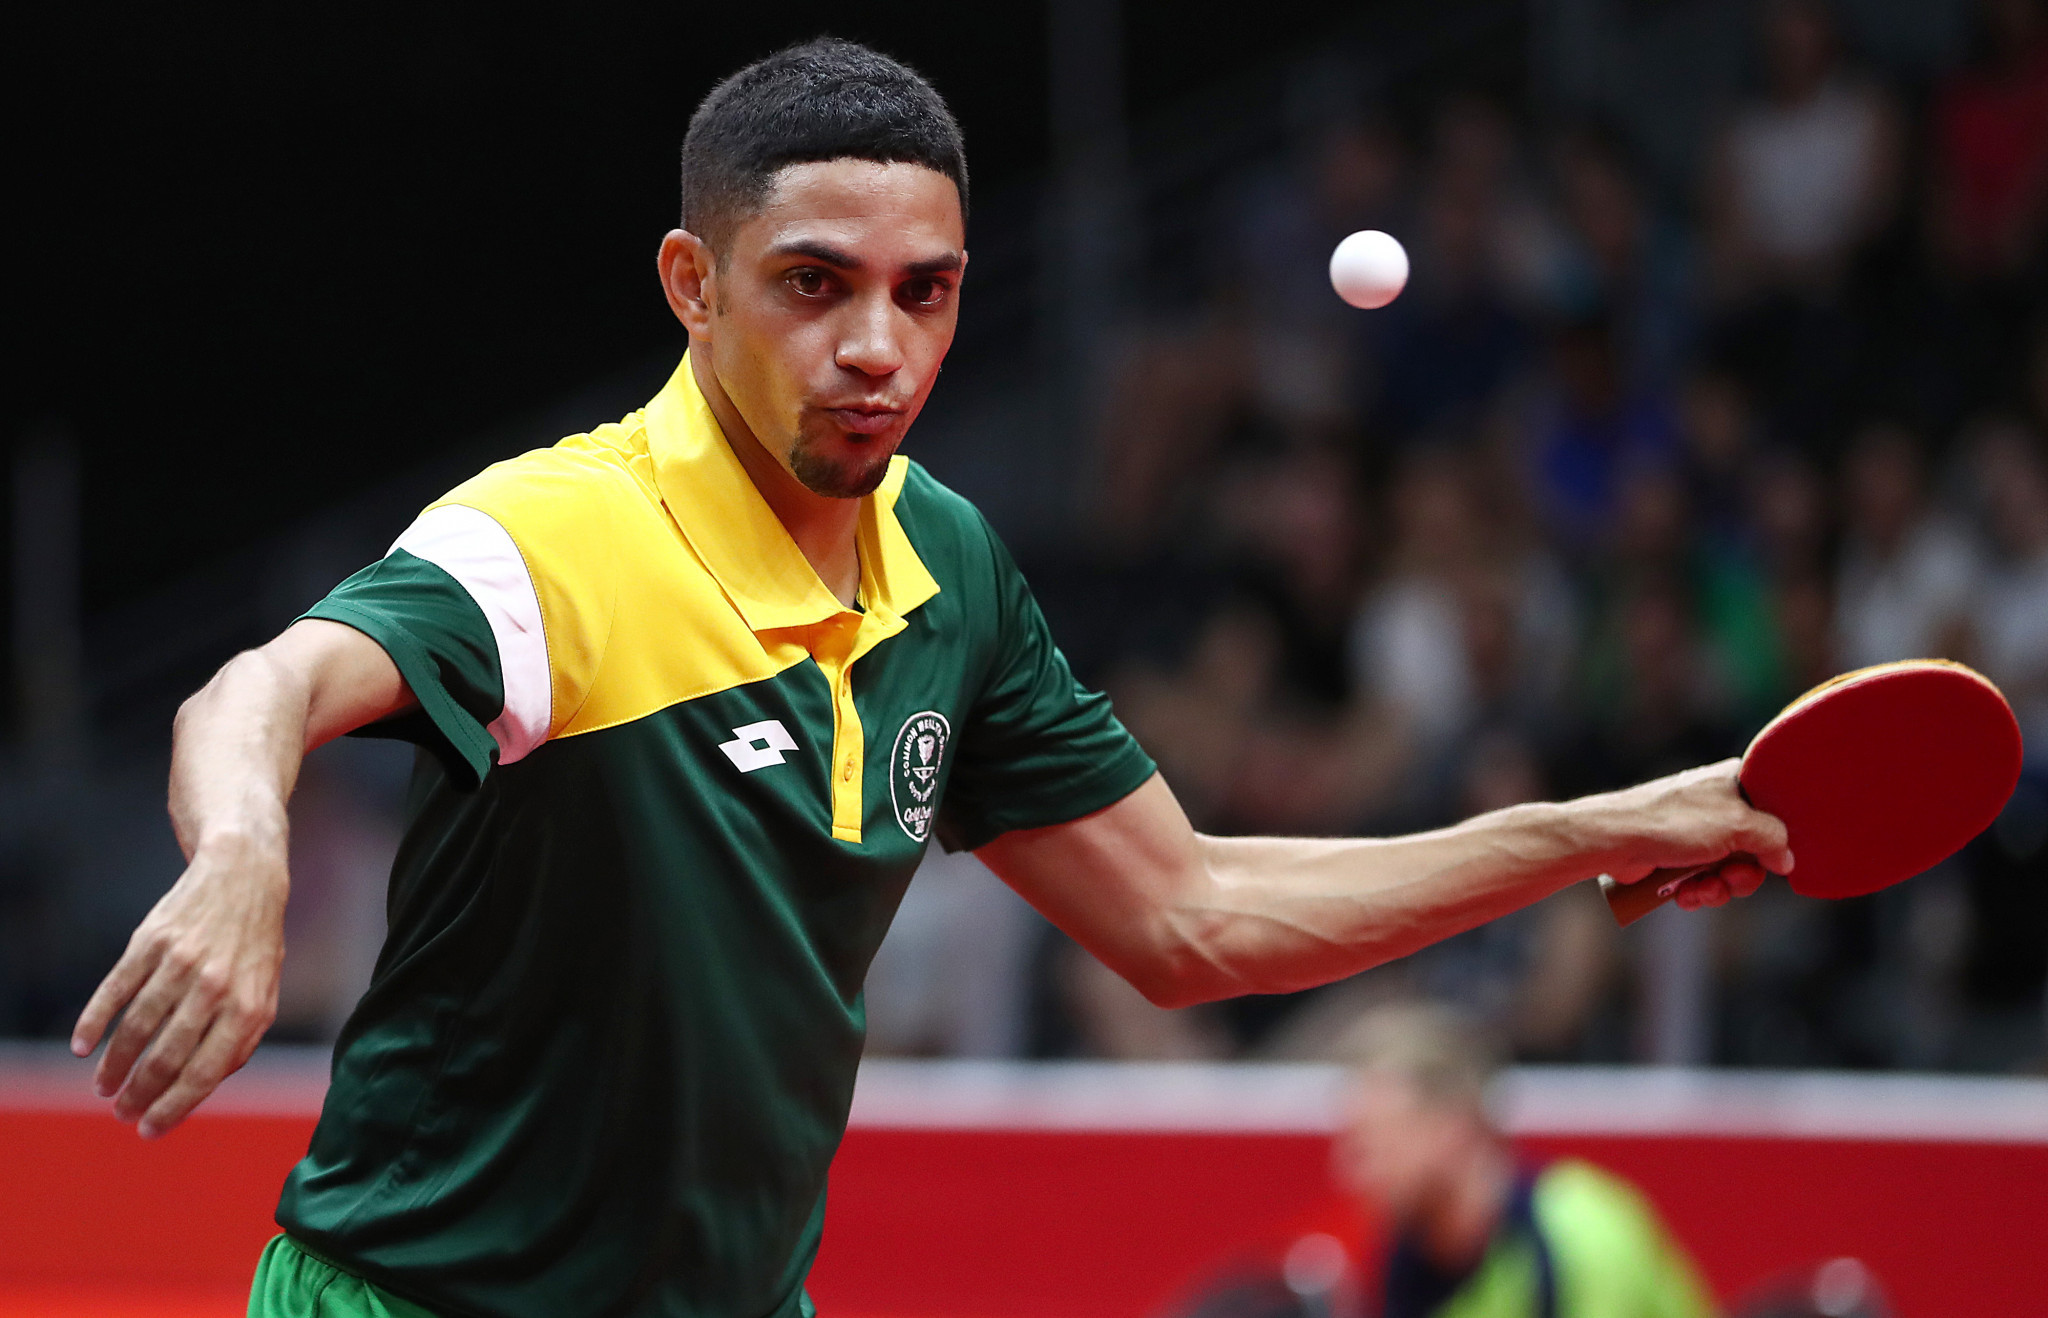 South Africa's Theo Cogill in action as Durban bids to host the 2023 World Table Tennis Championships ©Getty Images